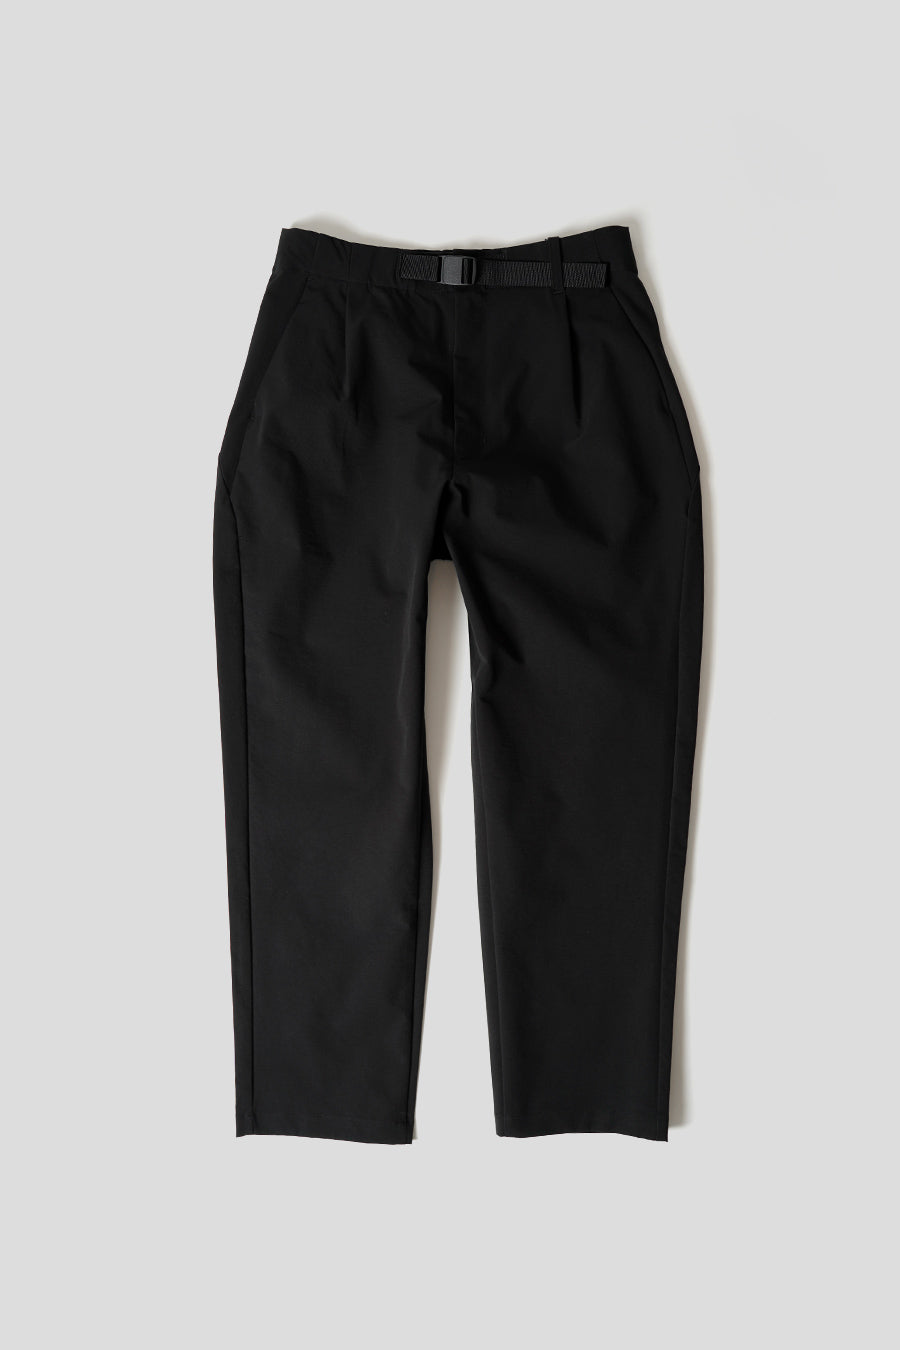 GOLDWIN - BLACK ONE TUCK TAPERED STRETCH PANTS